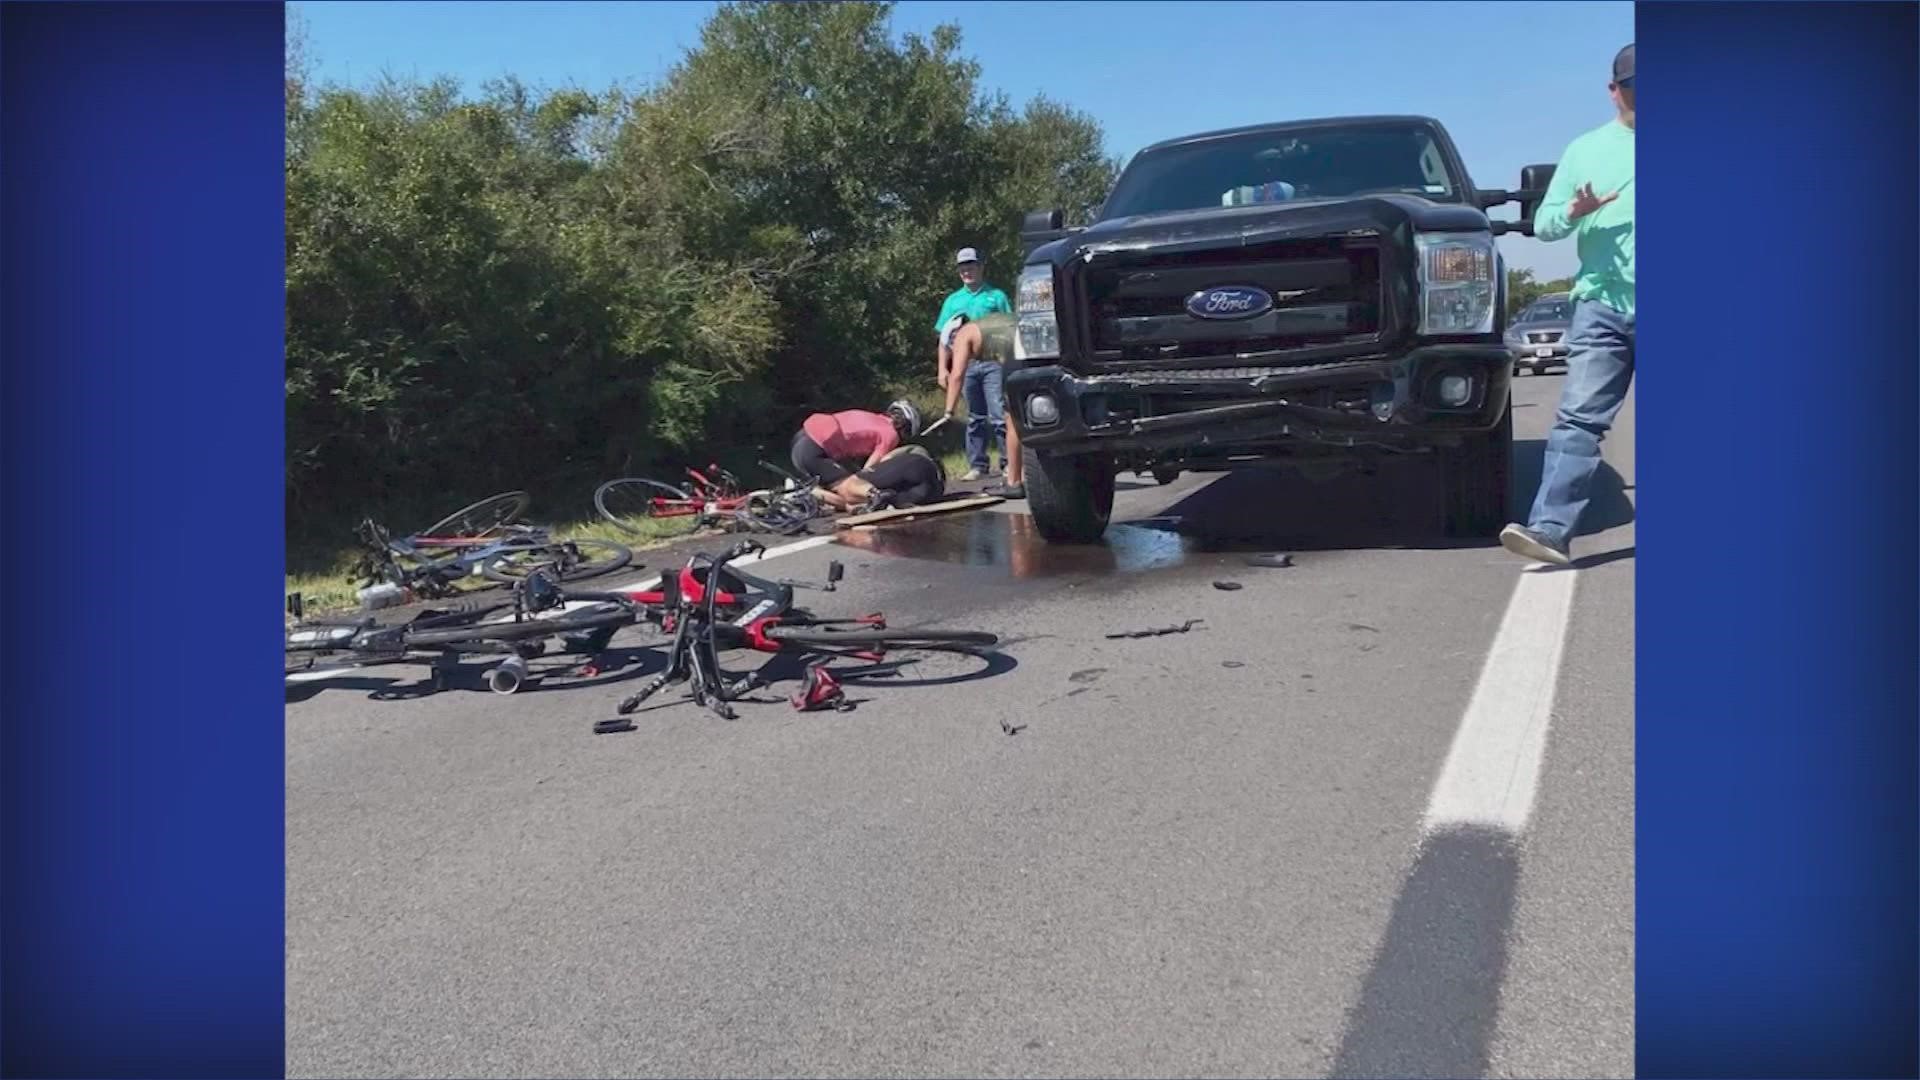 The case garnered national attention after the teen driver was let go without being charged even though witnesses said he'd been "rolling coal" on the cyclists.